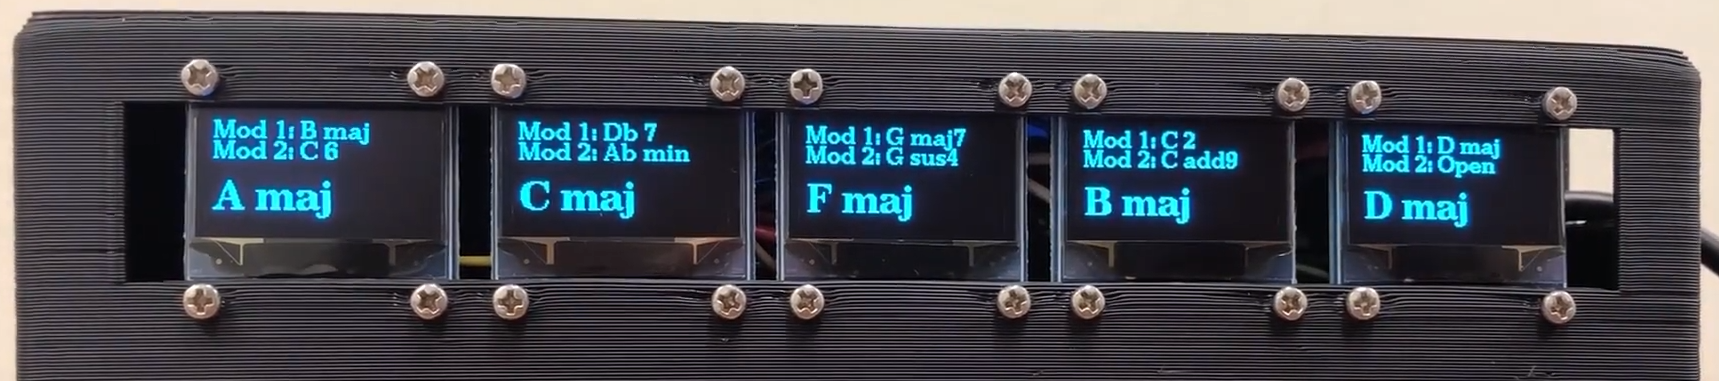 Chords displayed on the OLED screens